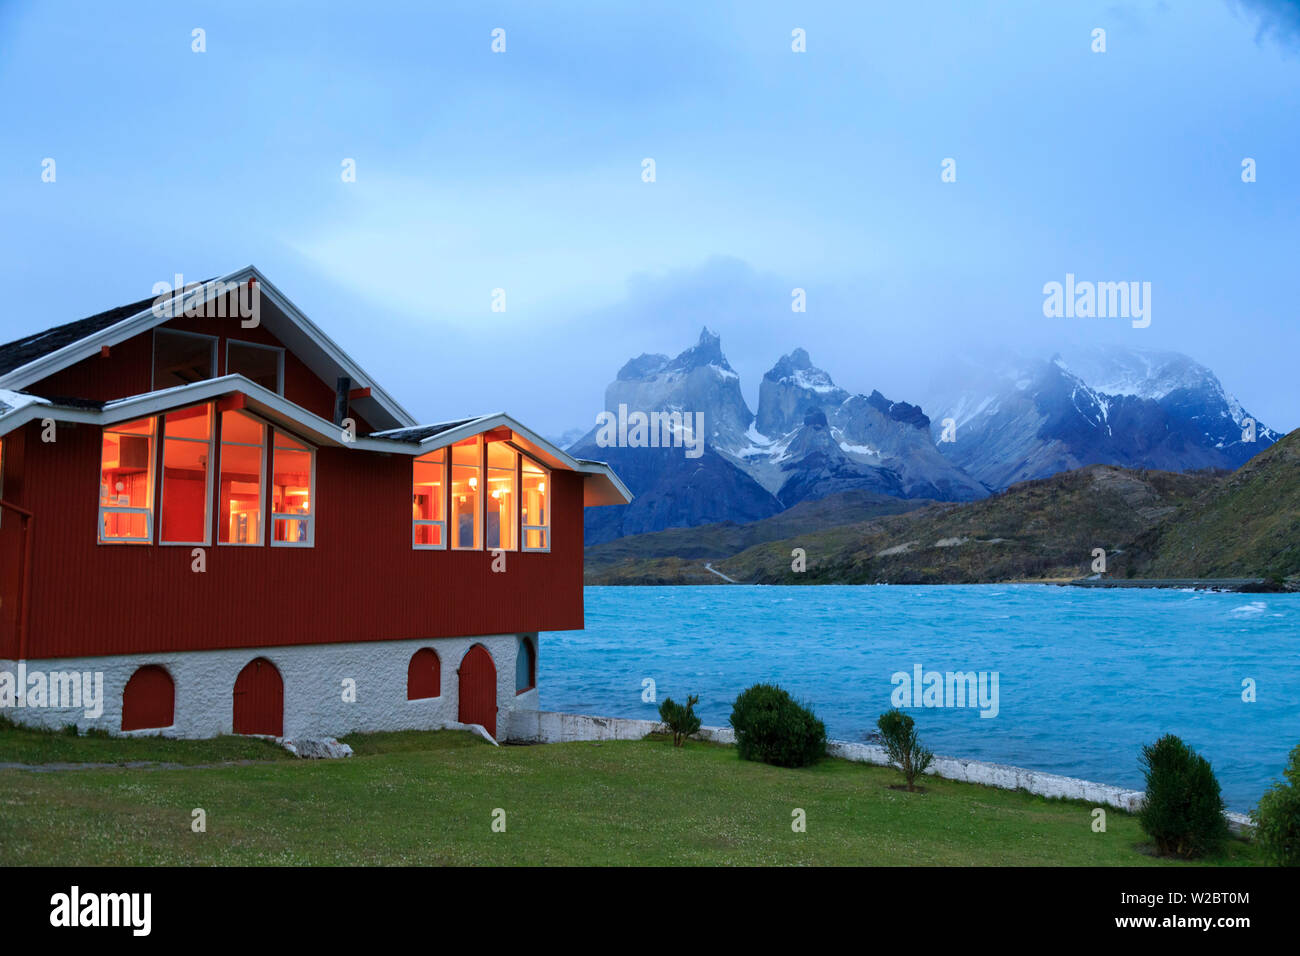 Chile, Patagonia, Torres del Paine National Park (UNESCO Site), Cuernos del Paine peaks and Hosteria Peohe Historic Hotel Stock Photo